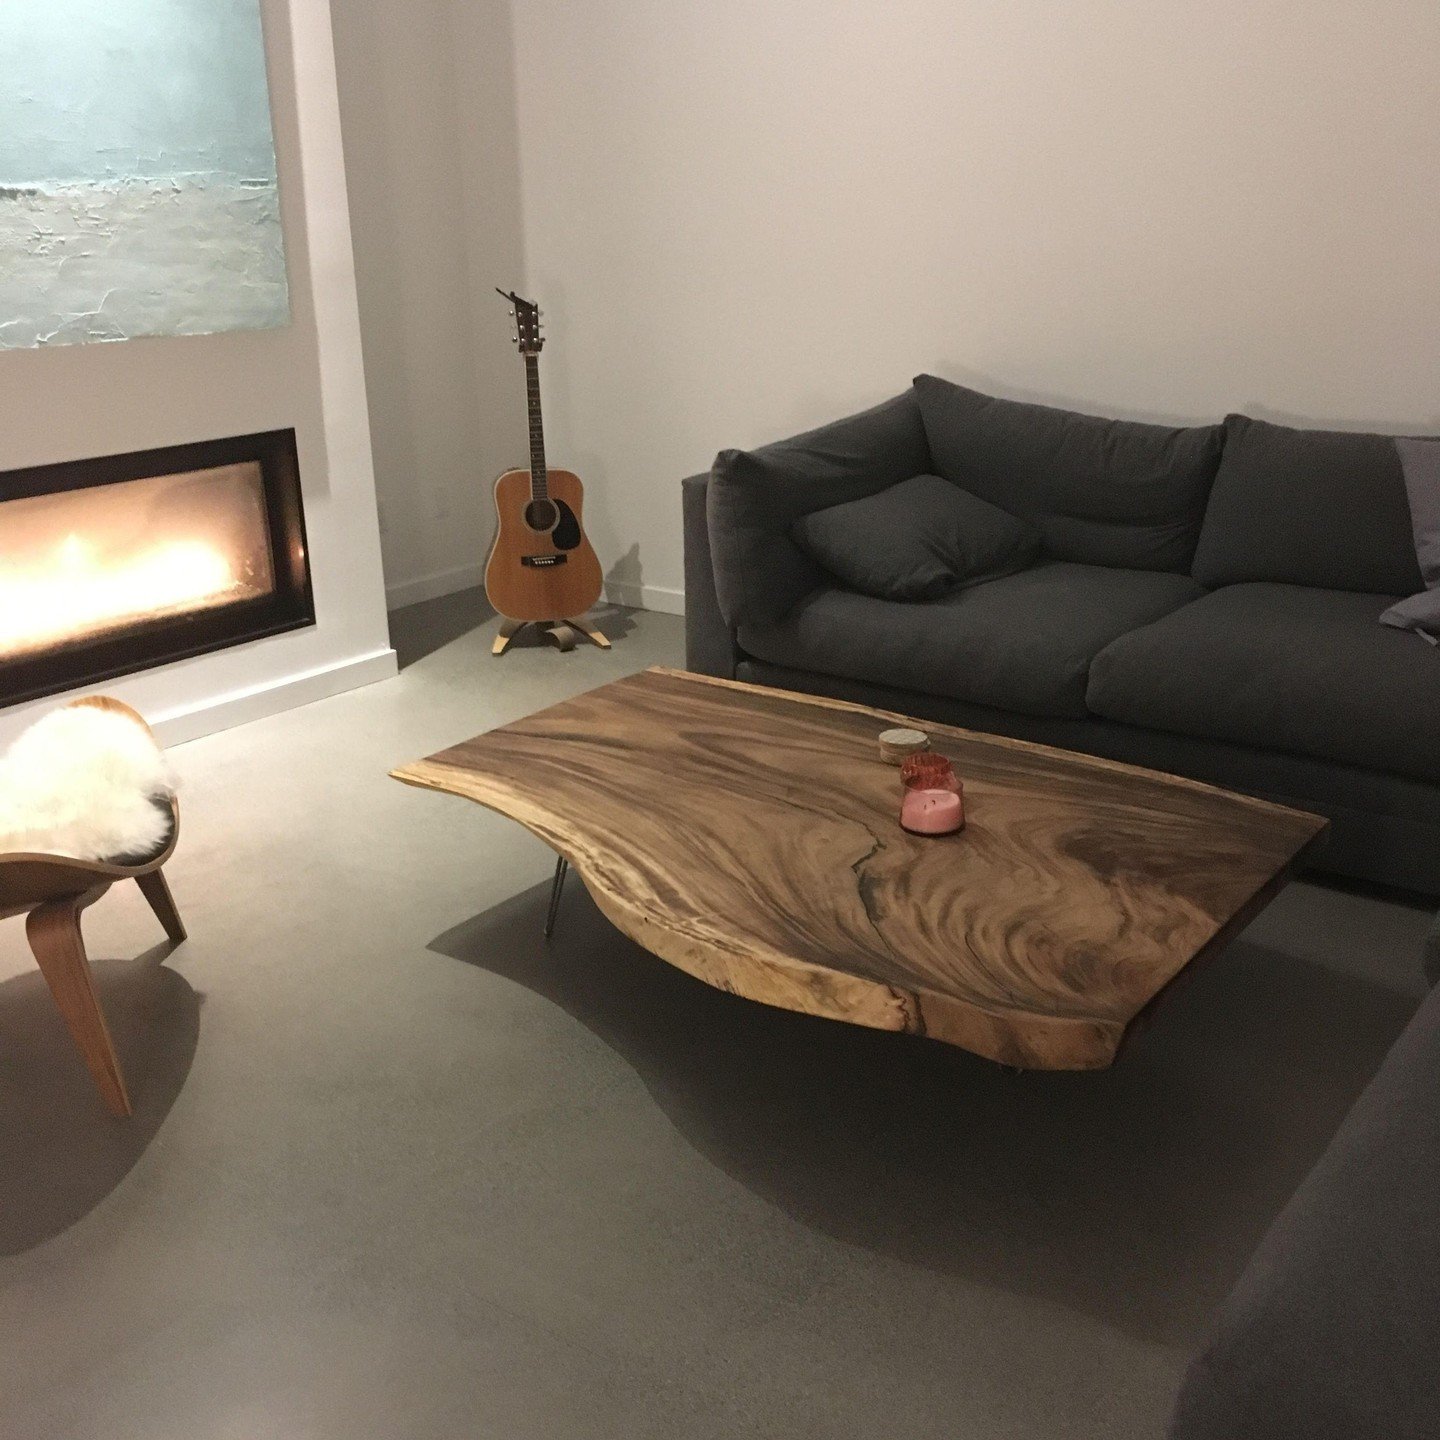 Looking for your dream coffee table? We'd love to help you with that! Get in touch with us through the link in our bio!